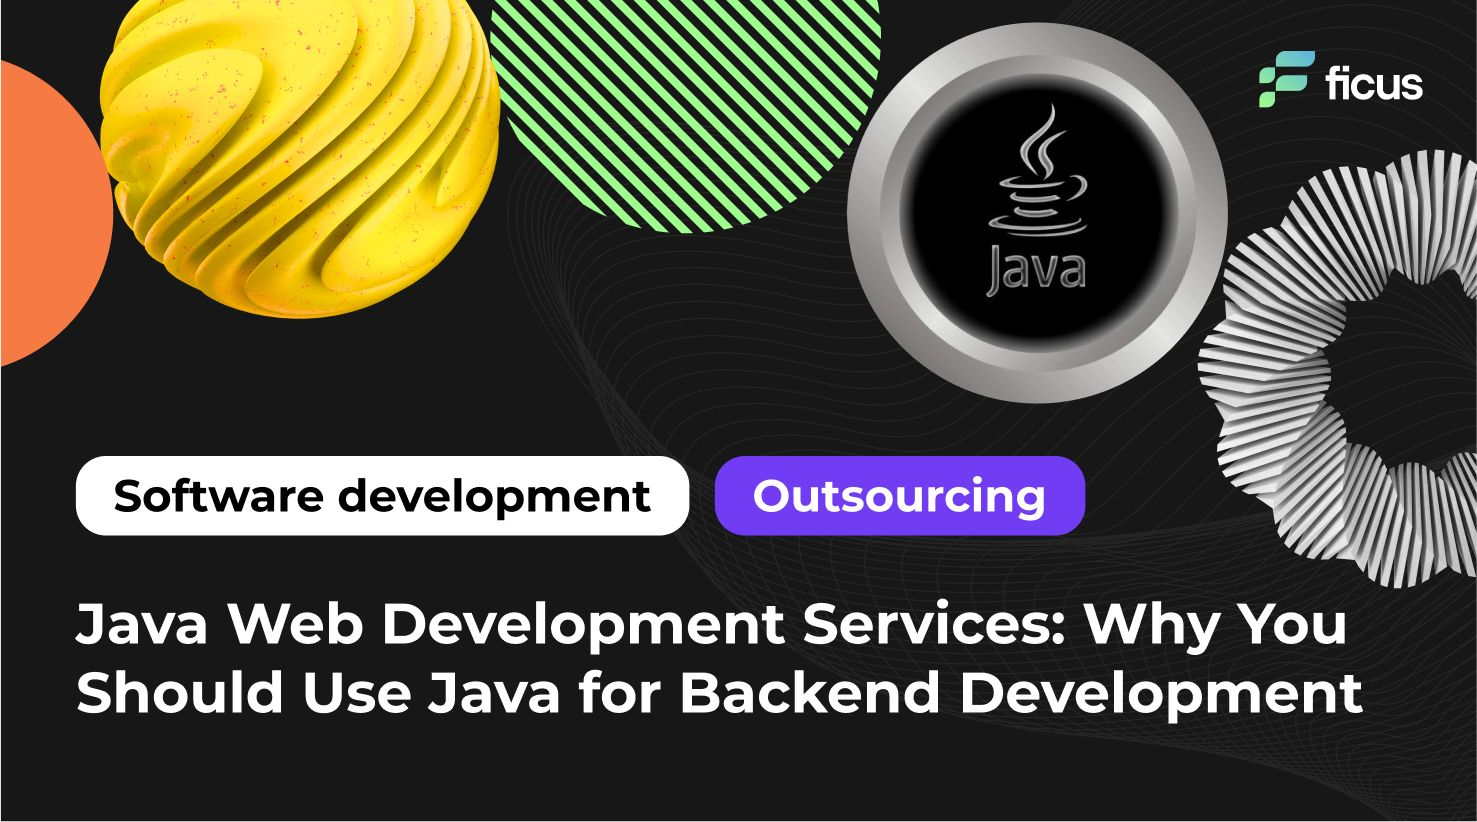 Java Web Development Services: Why You Should Use Java for Backend Development